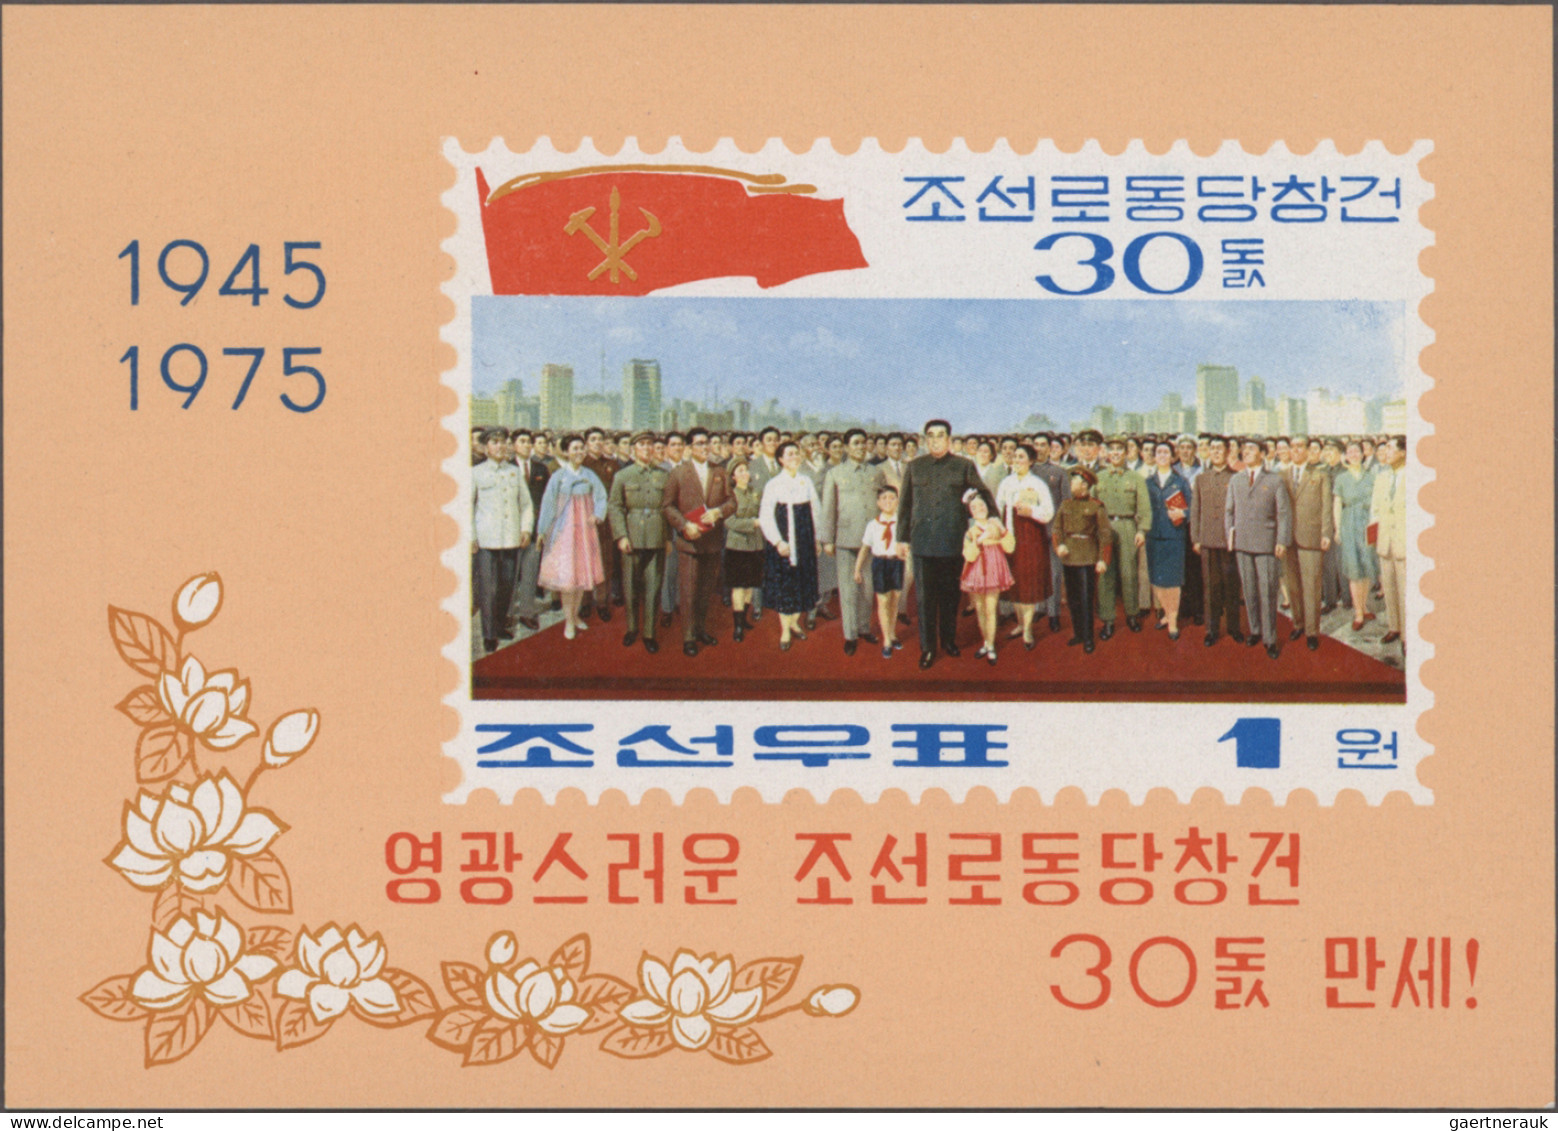 North Korea: 1946/2014, unused no gum as issued resp. mint never hinged MNH coll